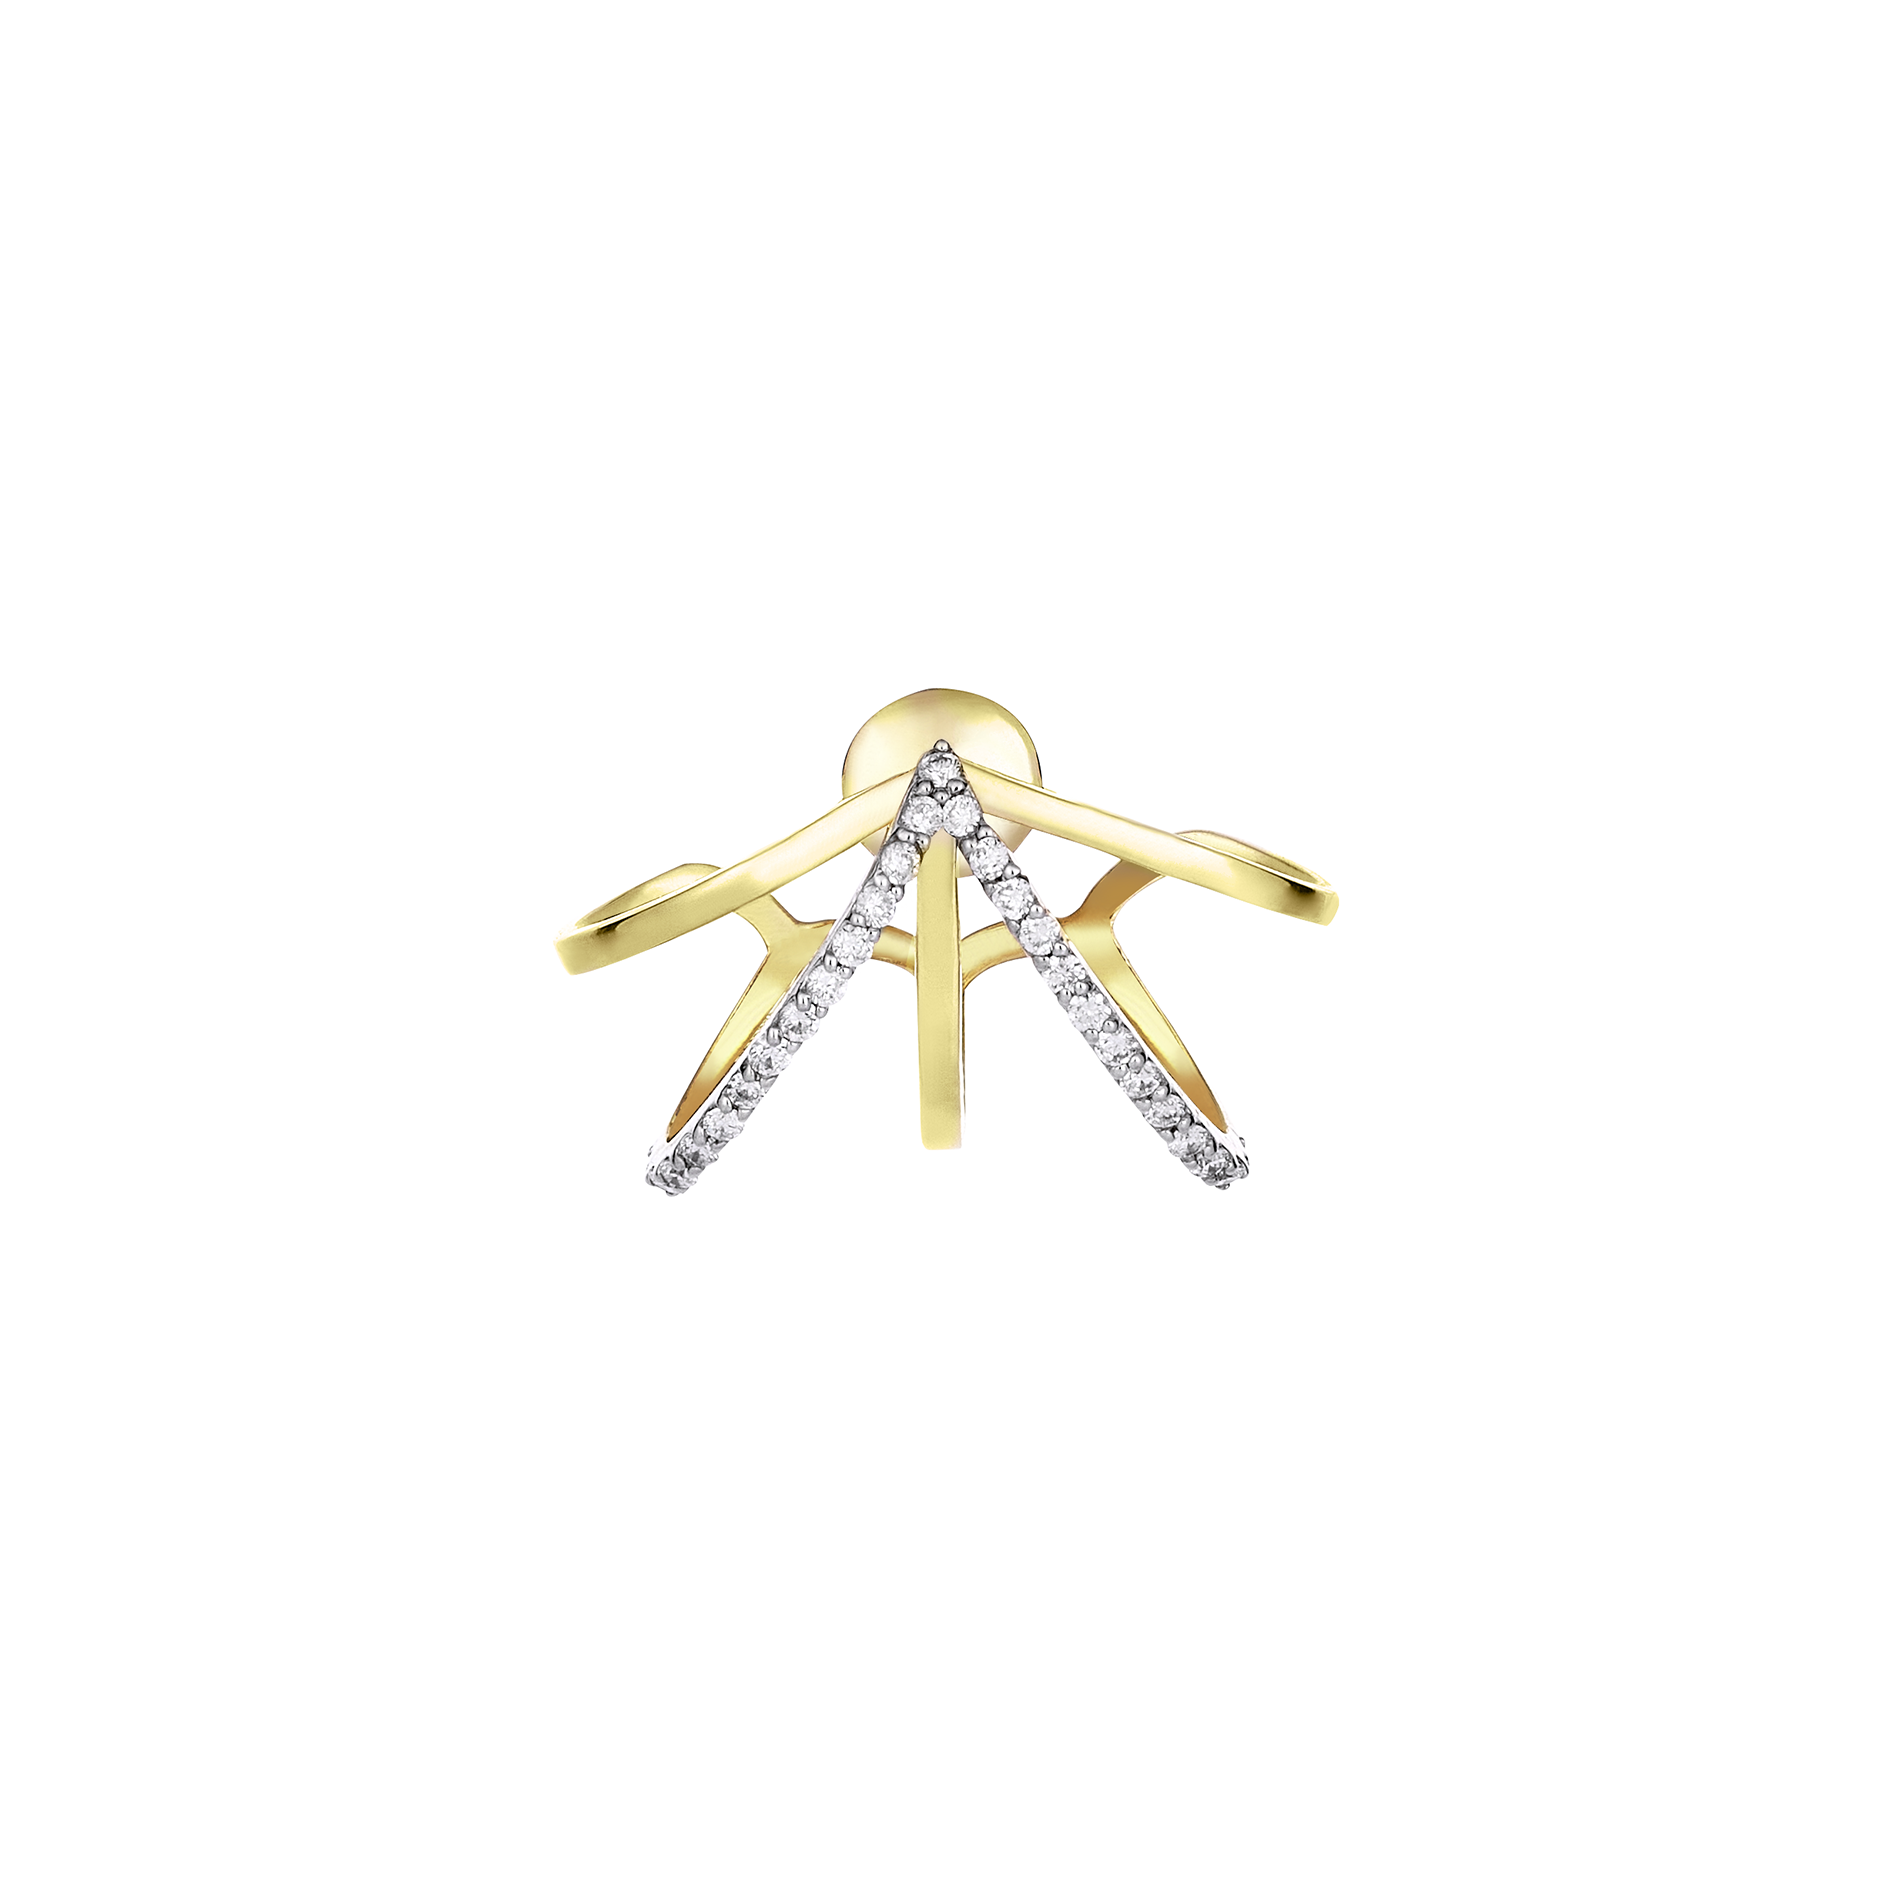 Pentapus Diamond Earcage in Yellow Gold - Her Story Shop